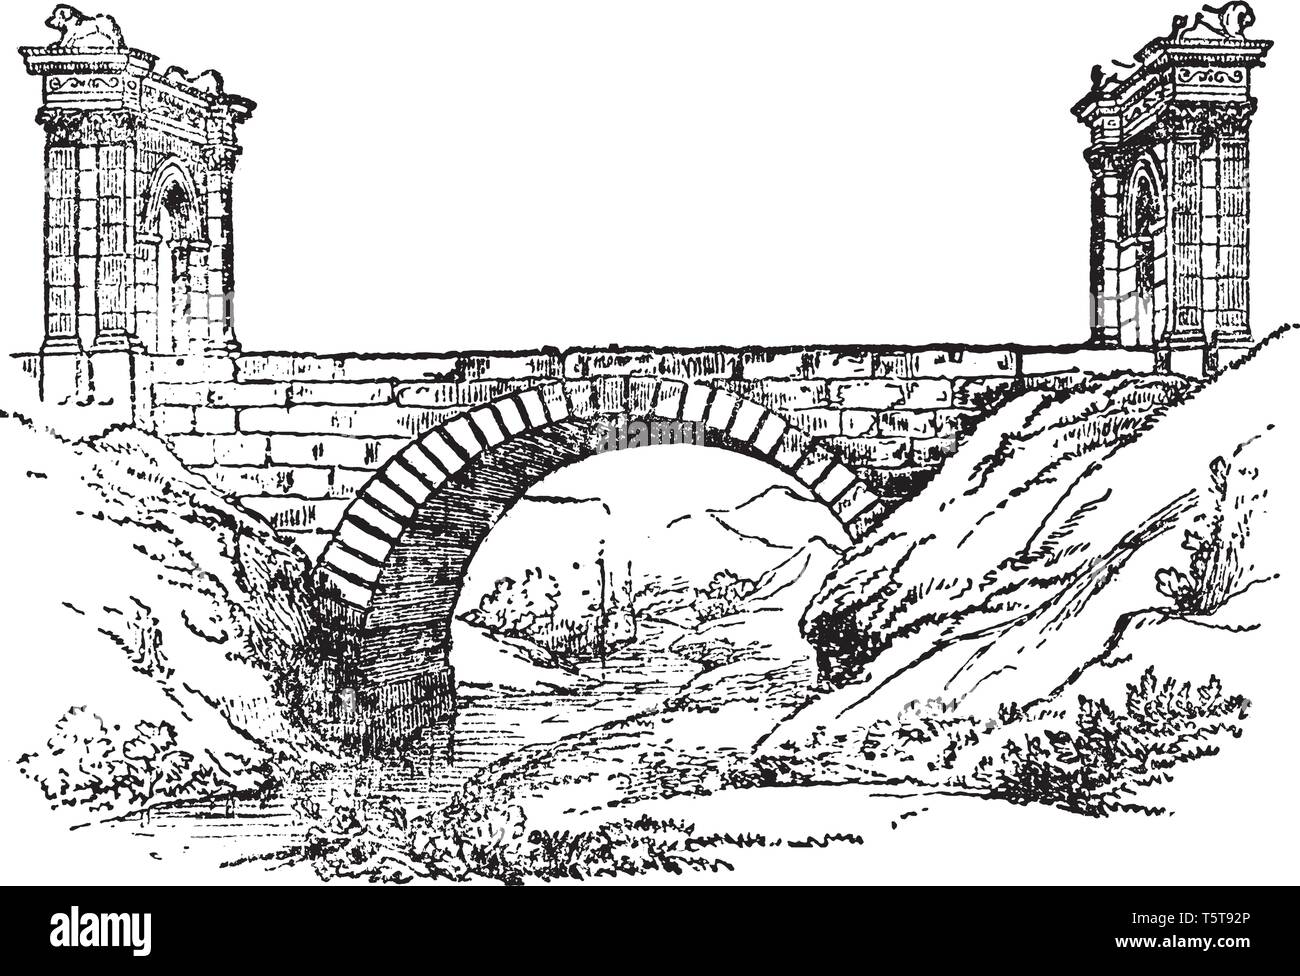 St Chamas Bridge is a commune in the department of Bouches du Rhne in the Provence Alpes Cte Azur region in southern France, vintage line drawing or e Stock Vector